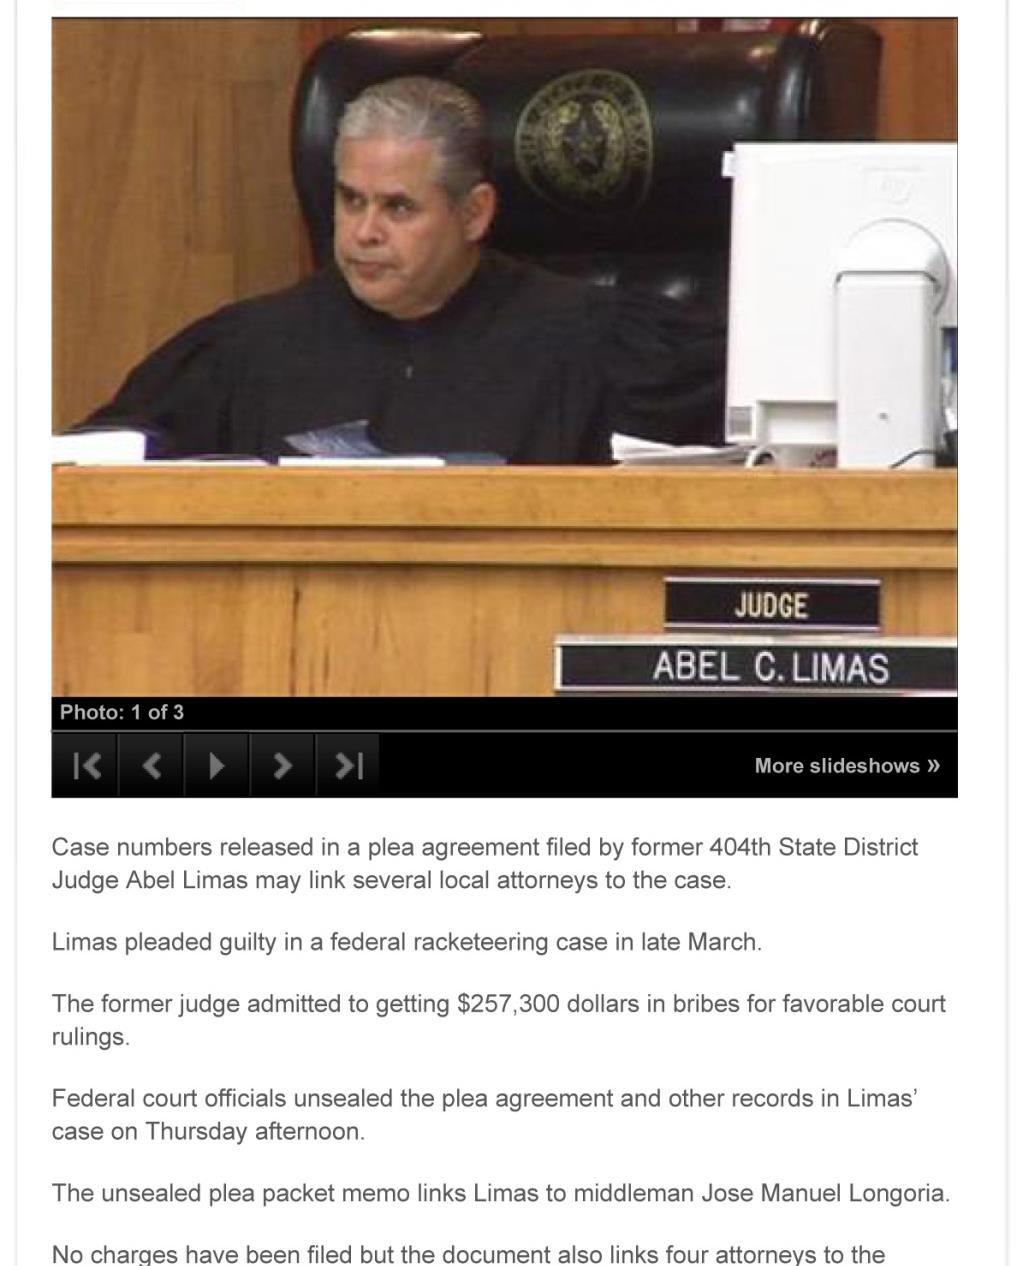 The Side Show Judge Limas pled guilty to